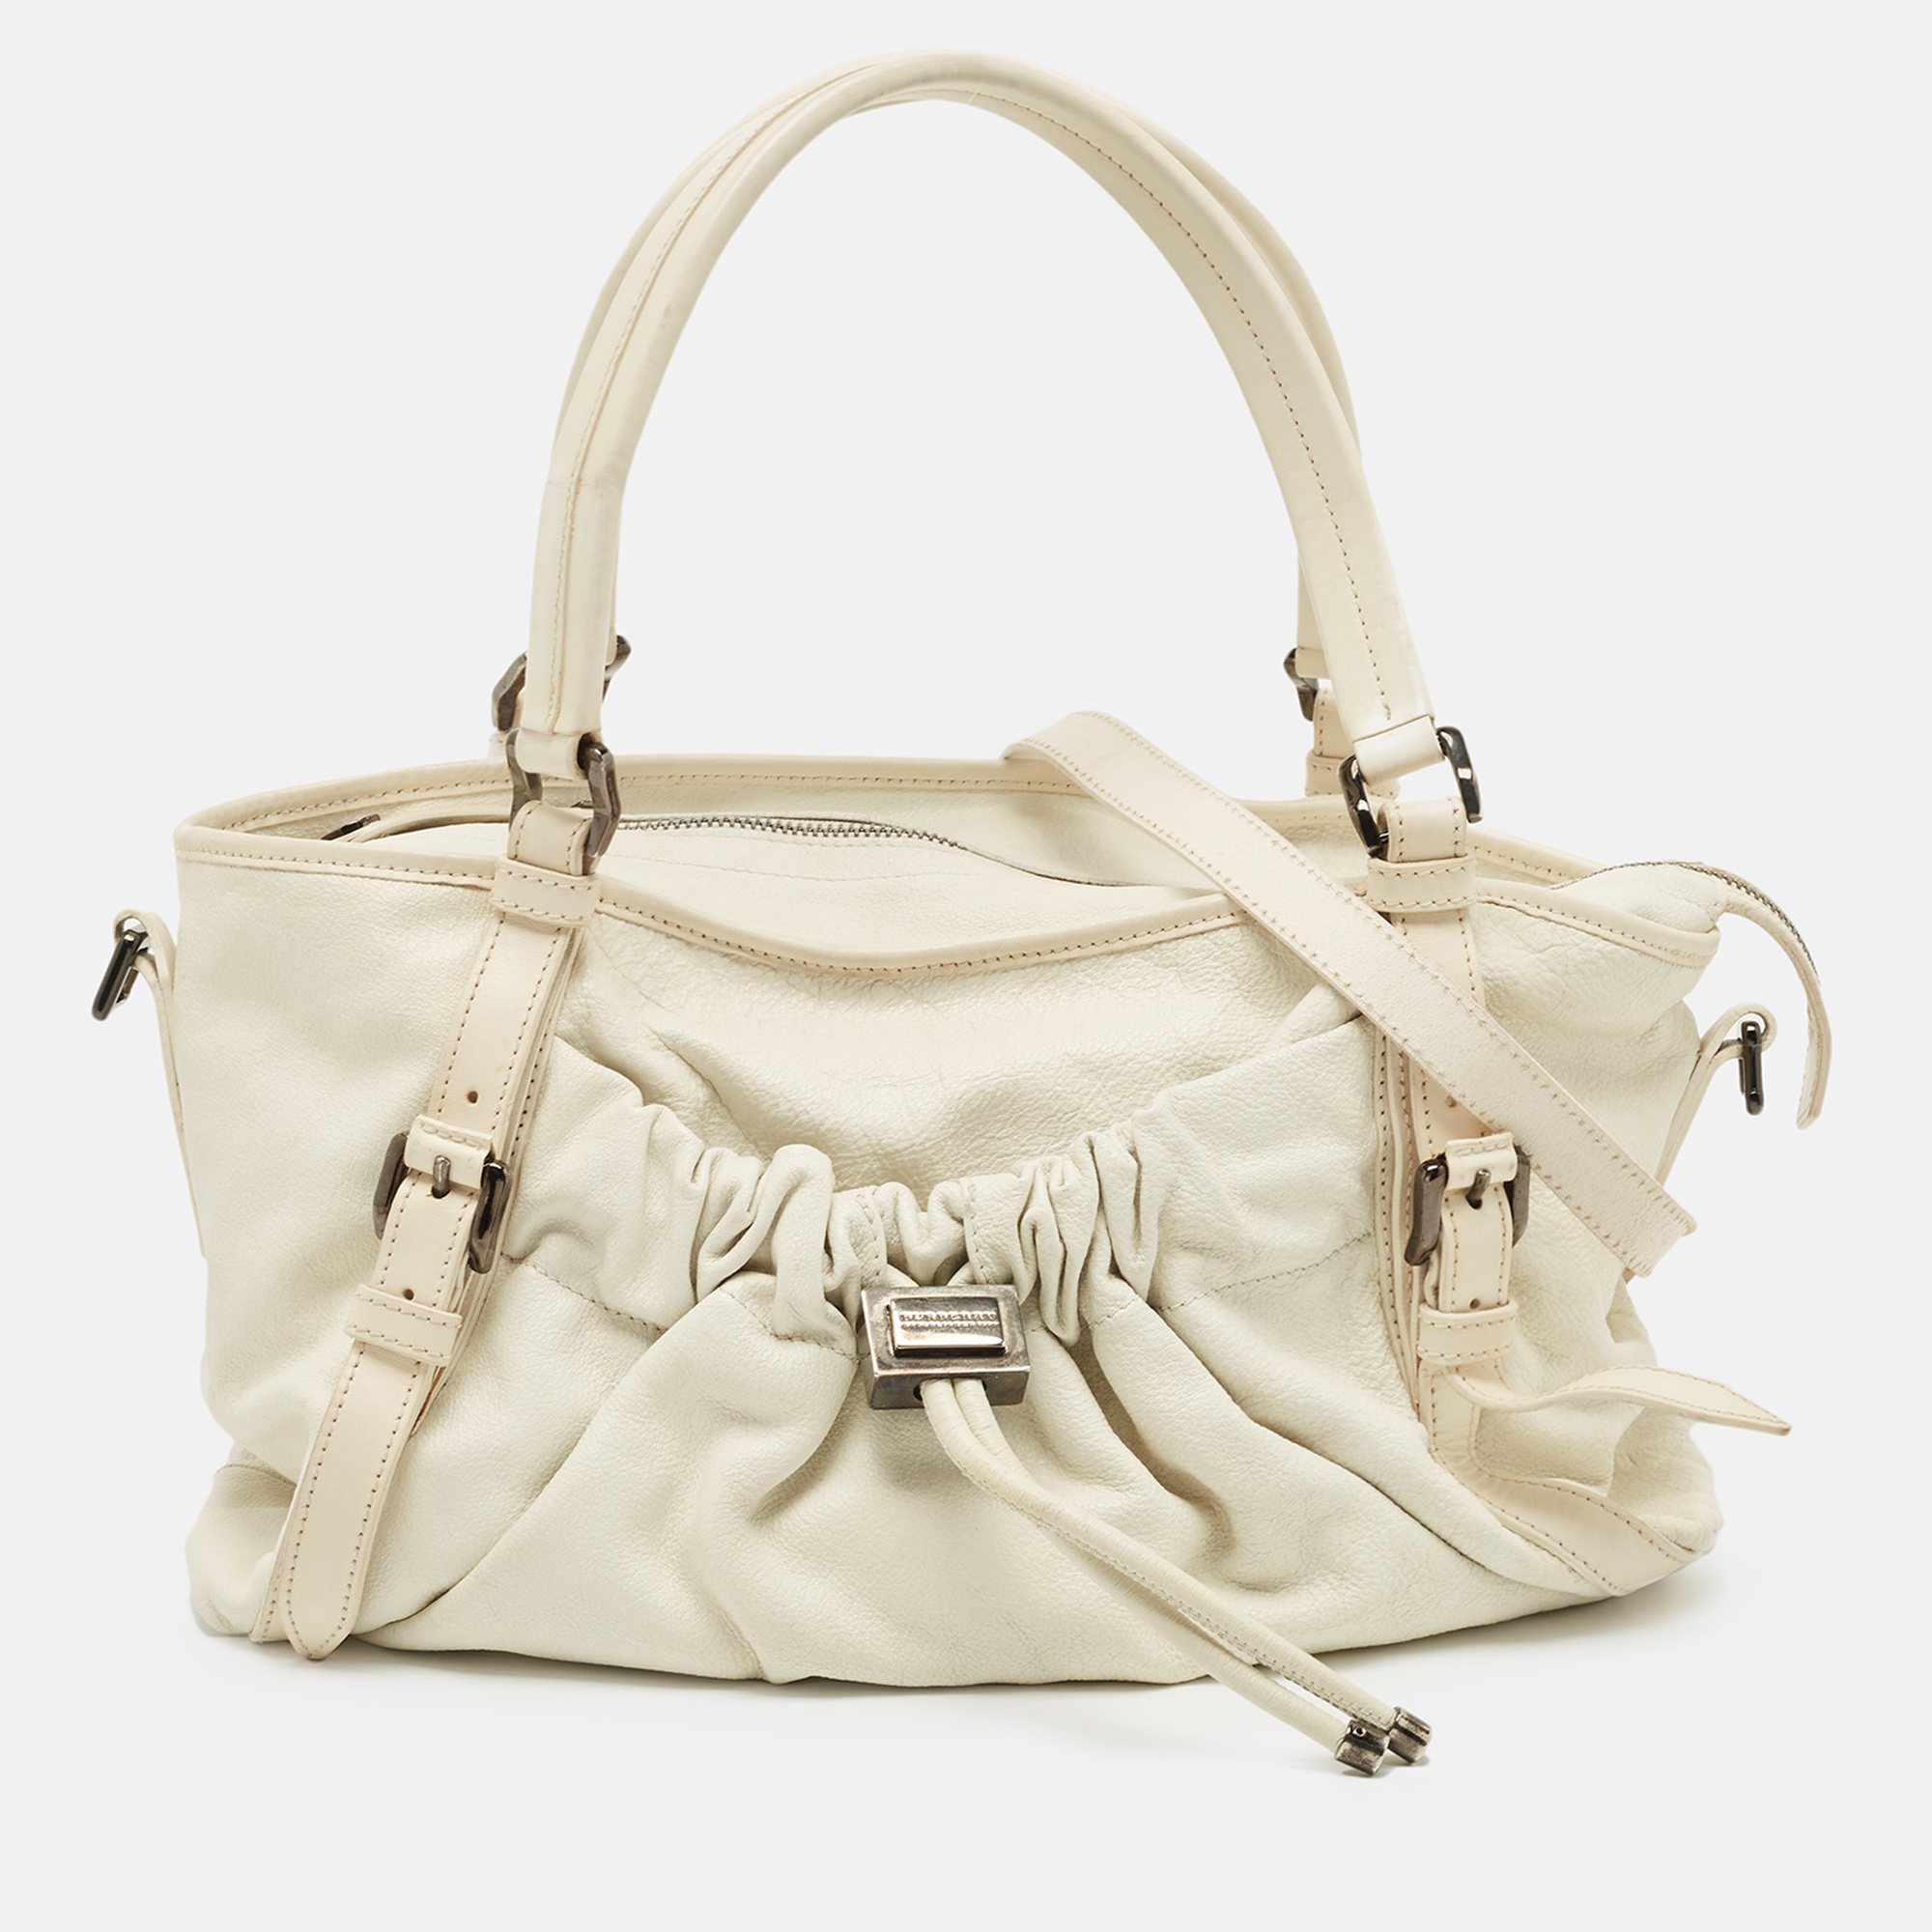 Burberry Off White Leather Drawstring Tote